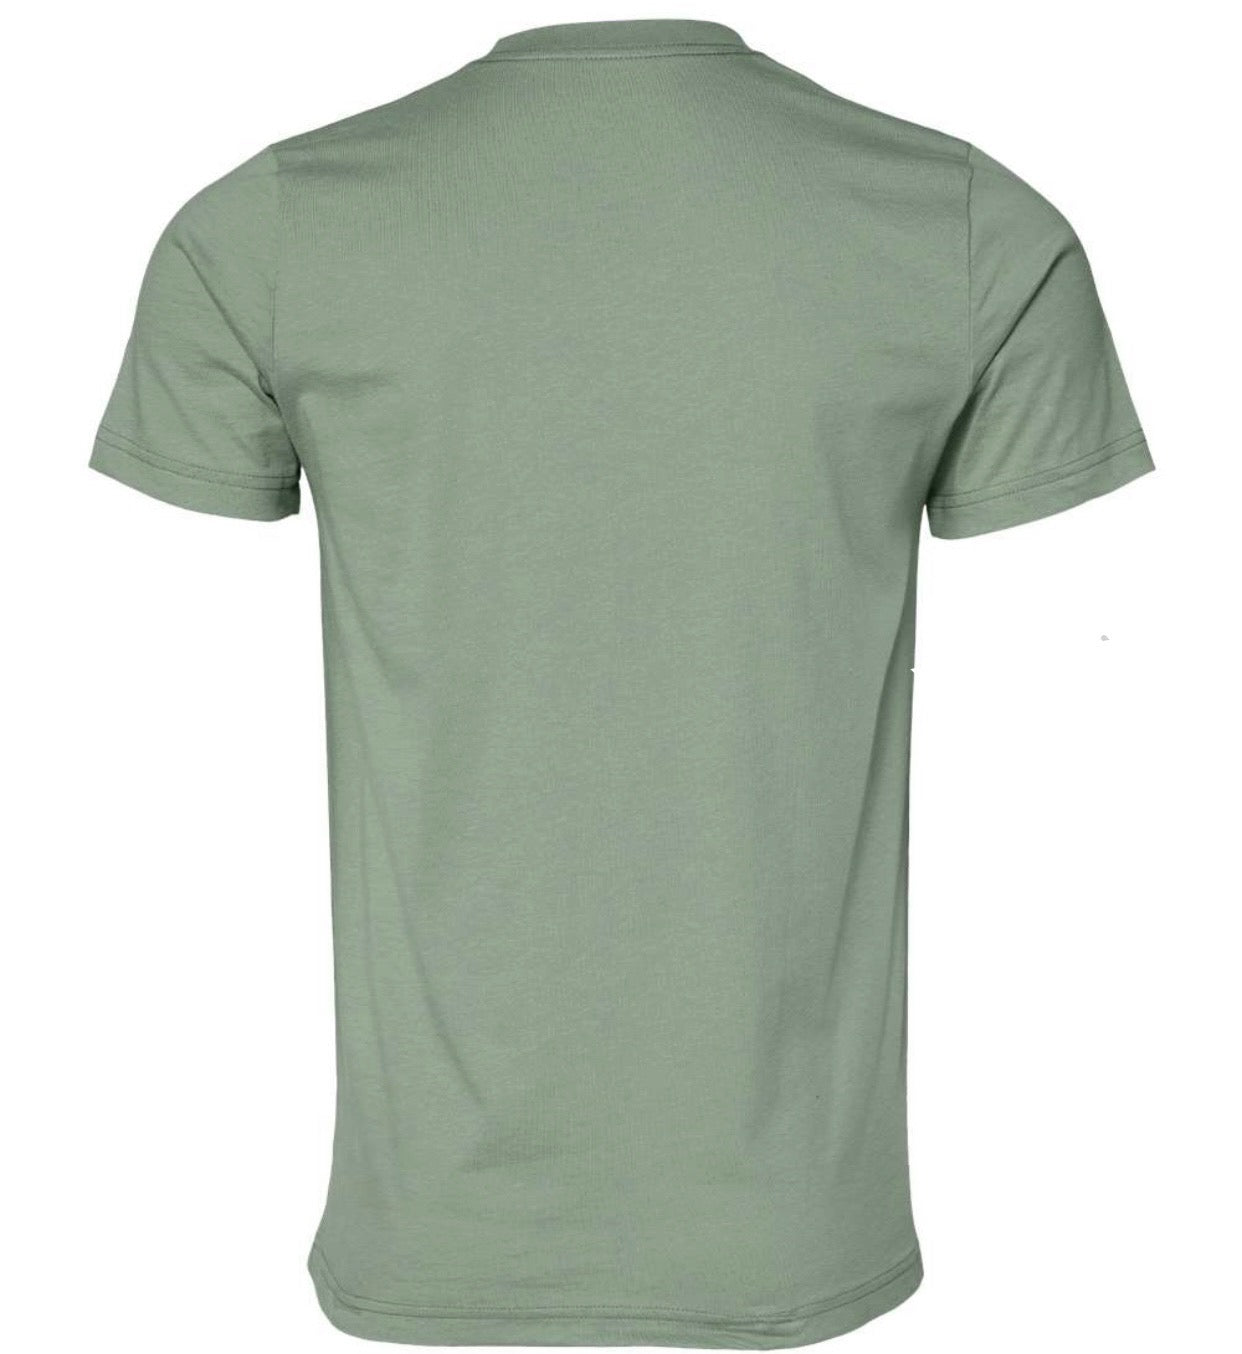 Lincoln Park West Seattle Moon Room T-Shirt Pre Order Sage Green - Moon Room Shop and Wellness